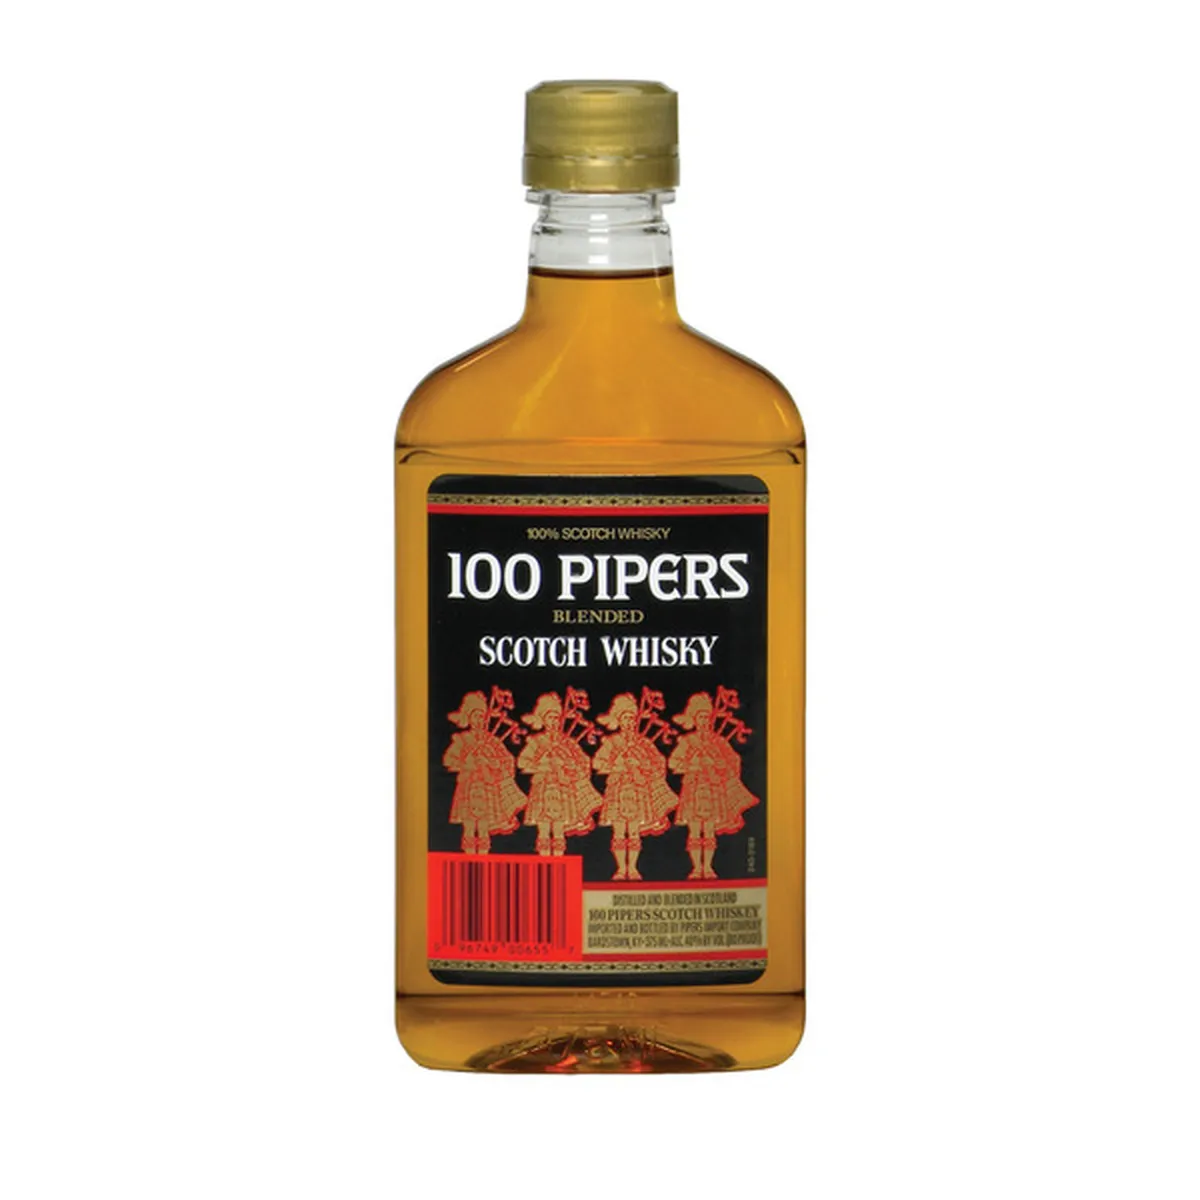 100 Pipers Glassware - #PlayForACause - YouTube